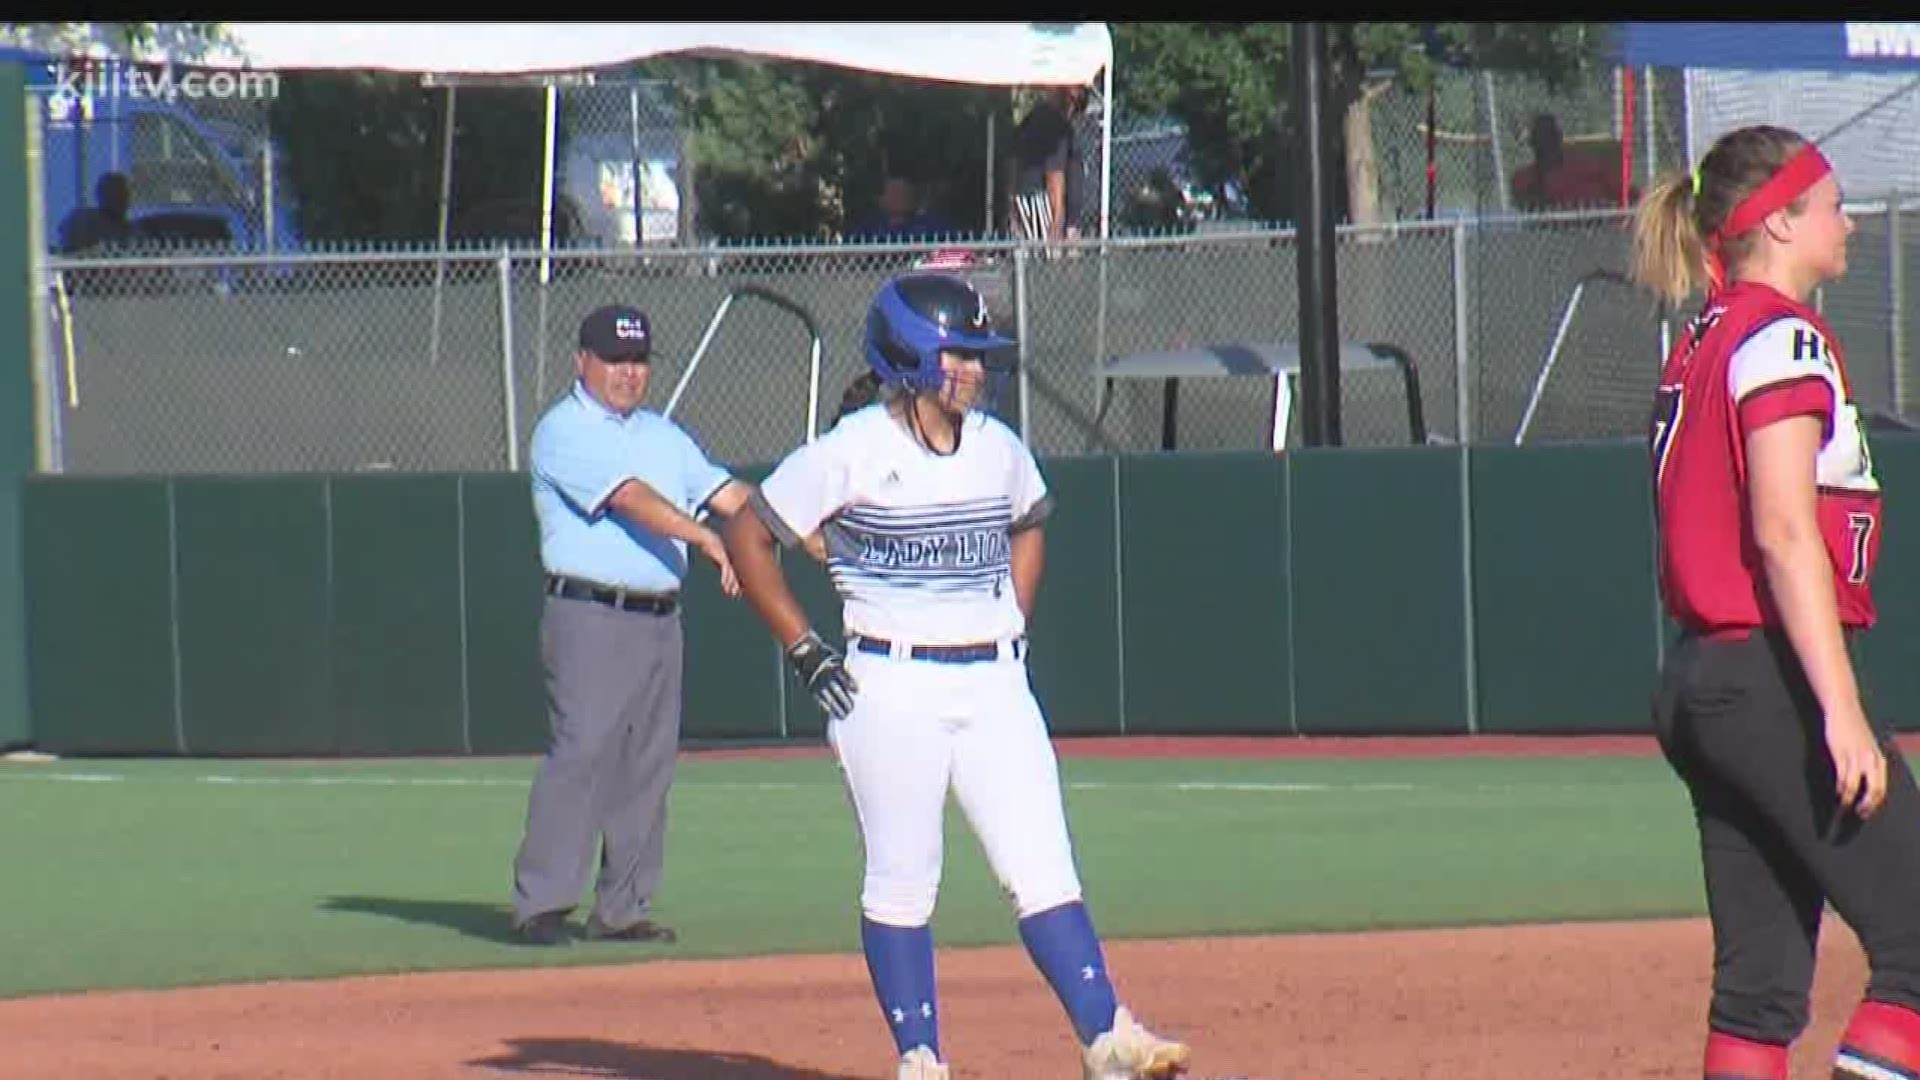 Highlights and Reaction from SGA's 8-3 win in the 3A State Championship over Hughes Springs.